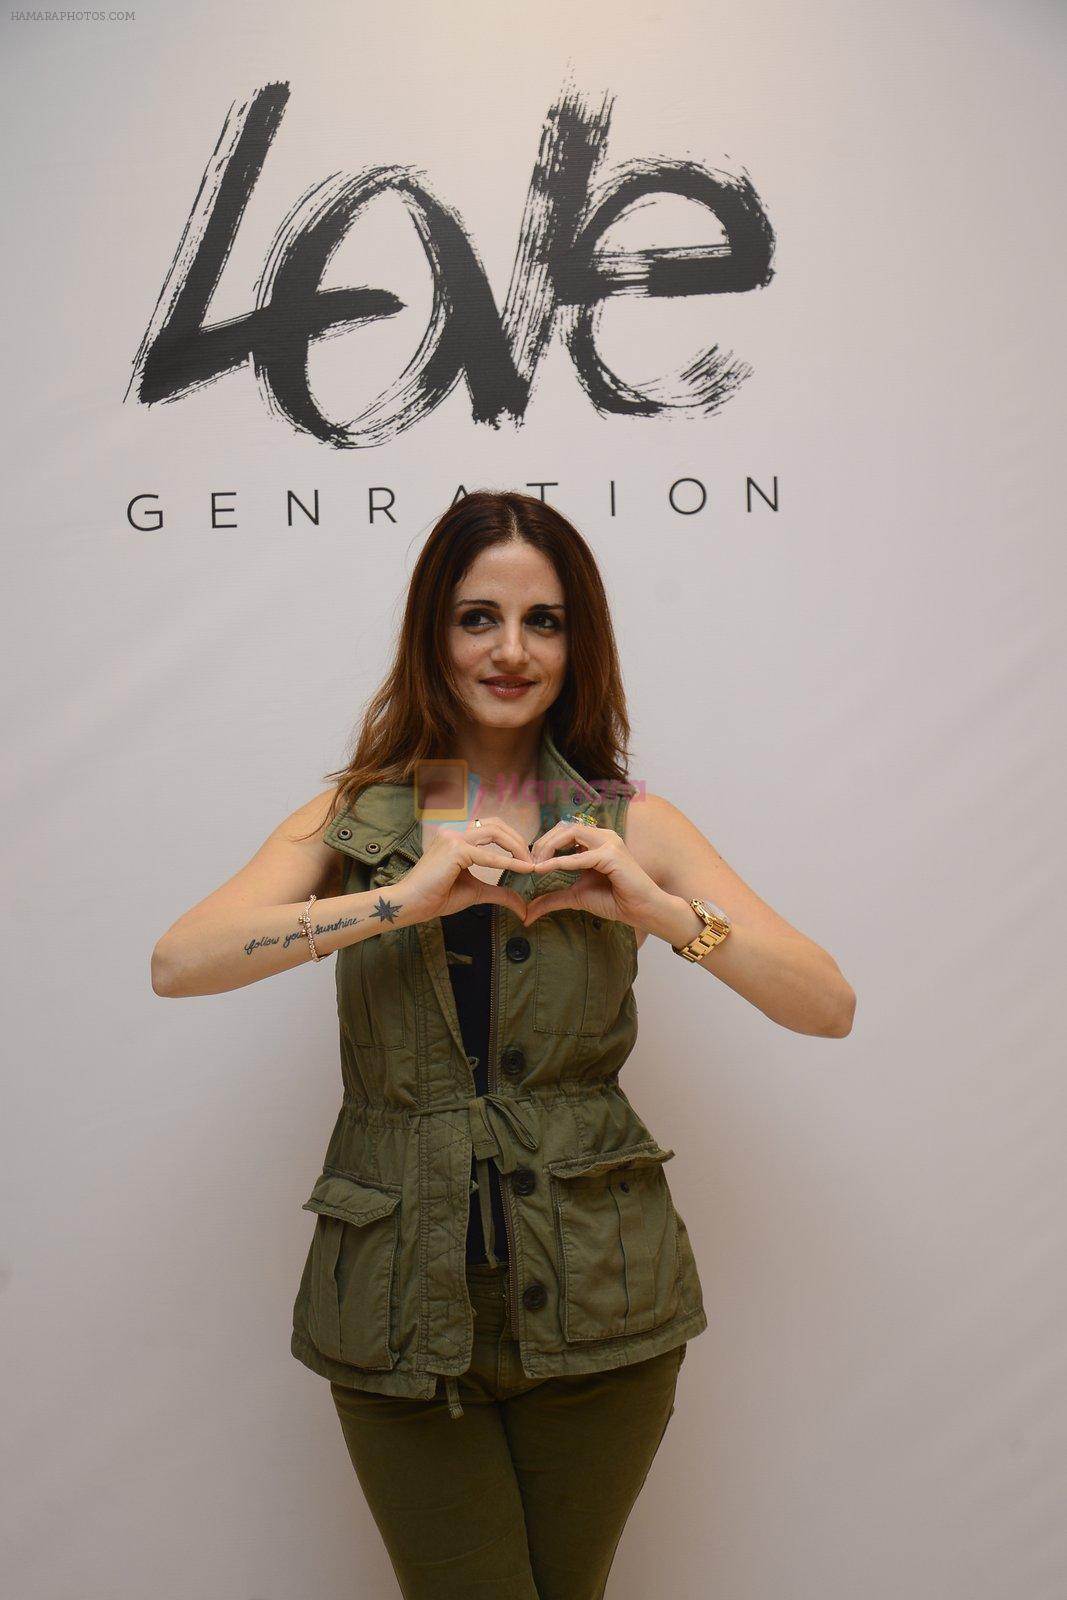 Suzanne Khan at Love Generation launch at Shoppers Stop on 7th Oct 2016